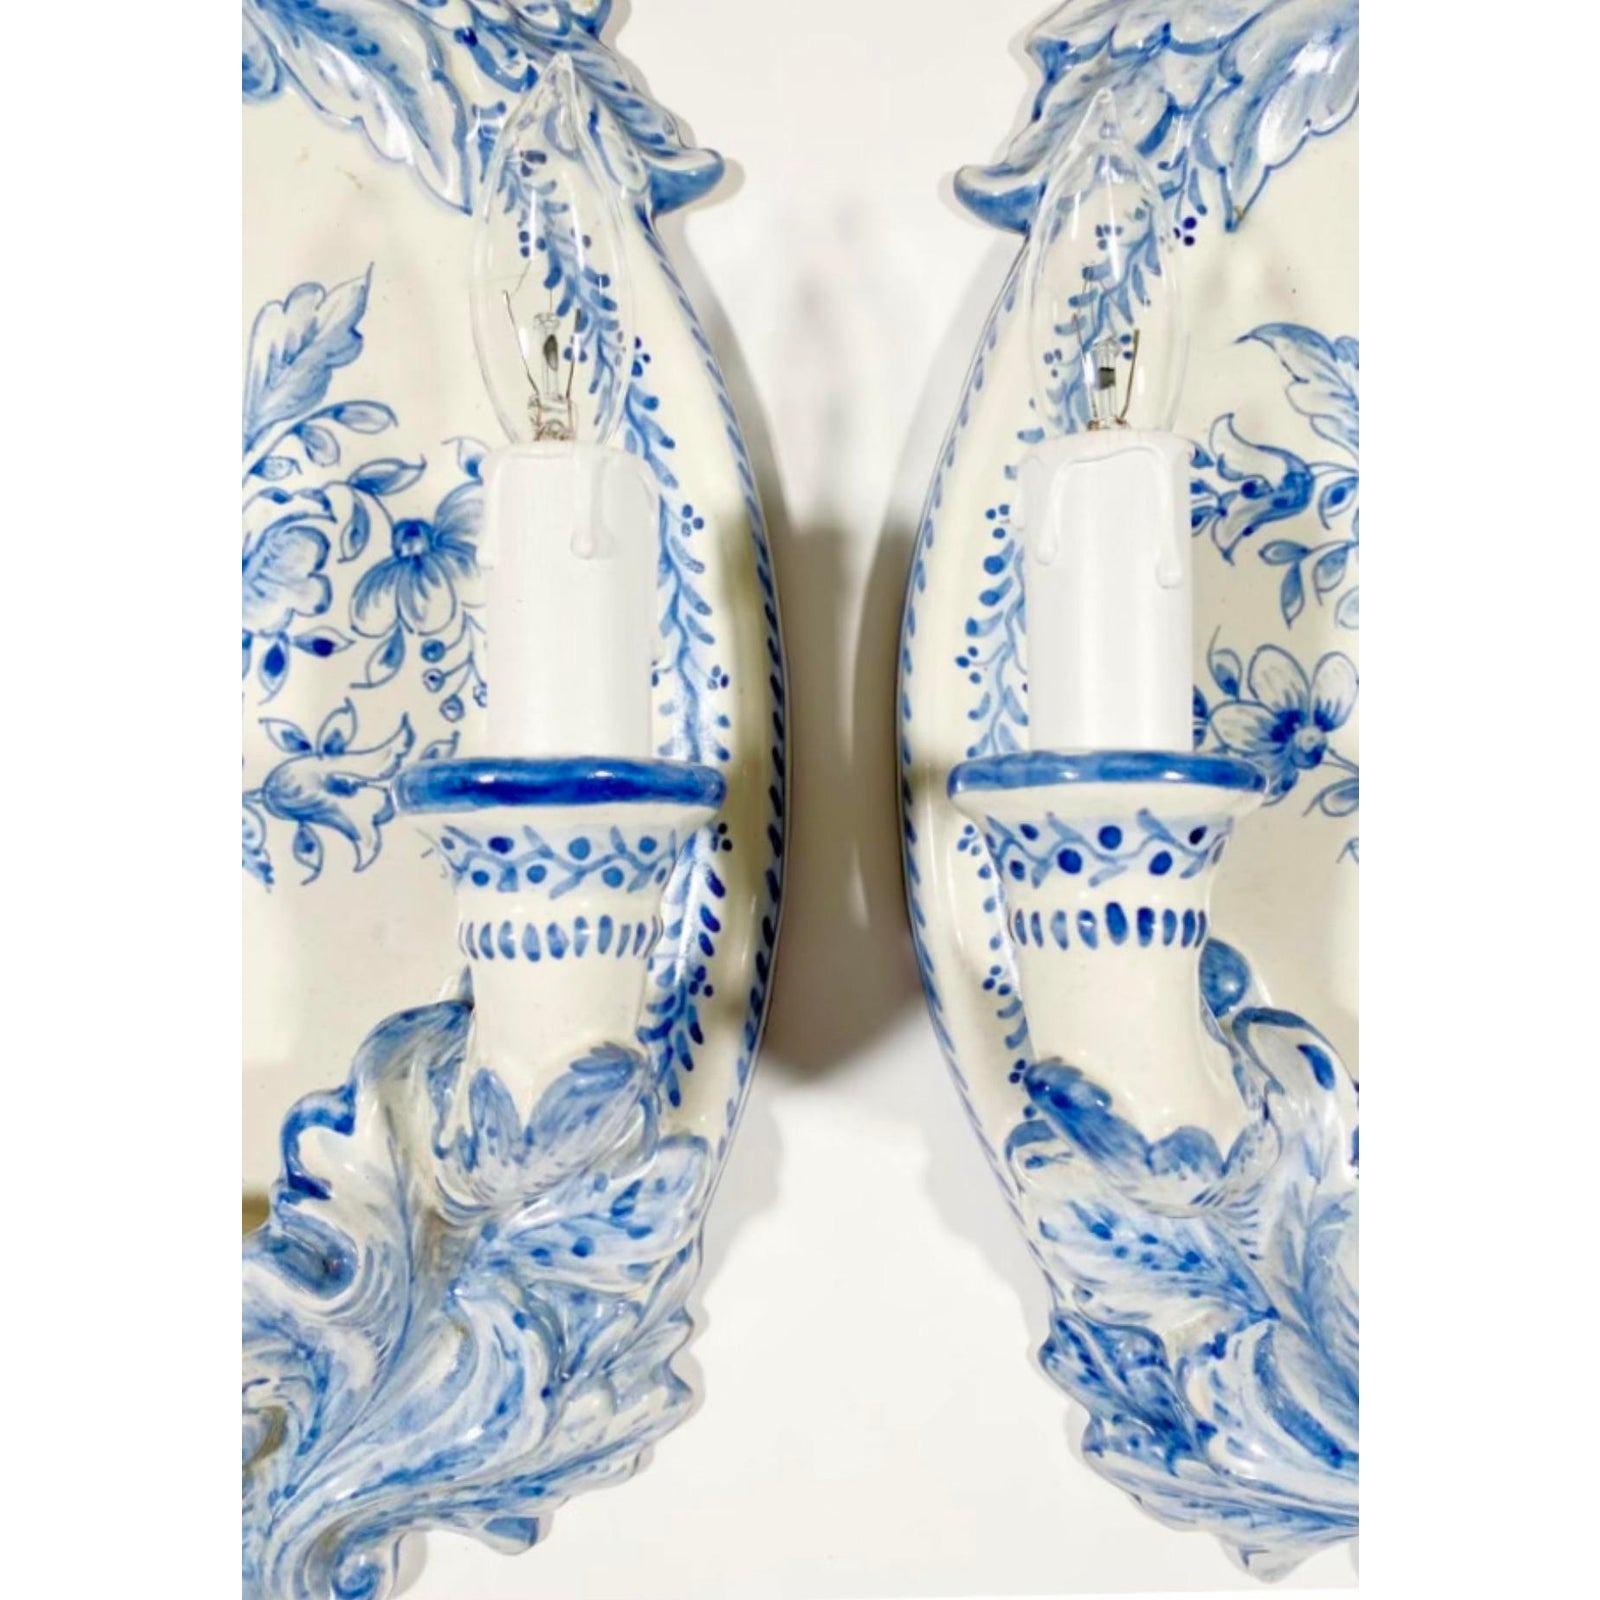 A gorgeous pair of vintage Italian ceramic sconces in white and blue. The floral details are hand painted. Acquired at a Palm Beach estate.